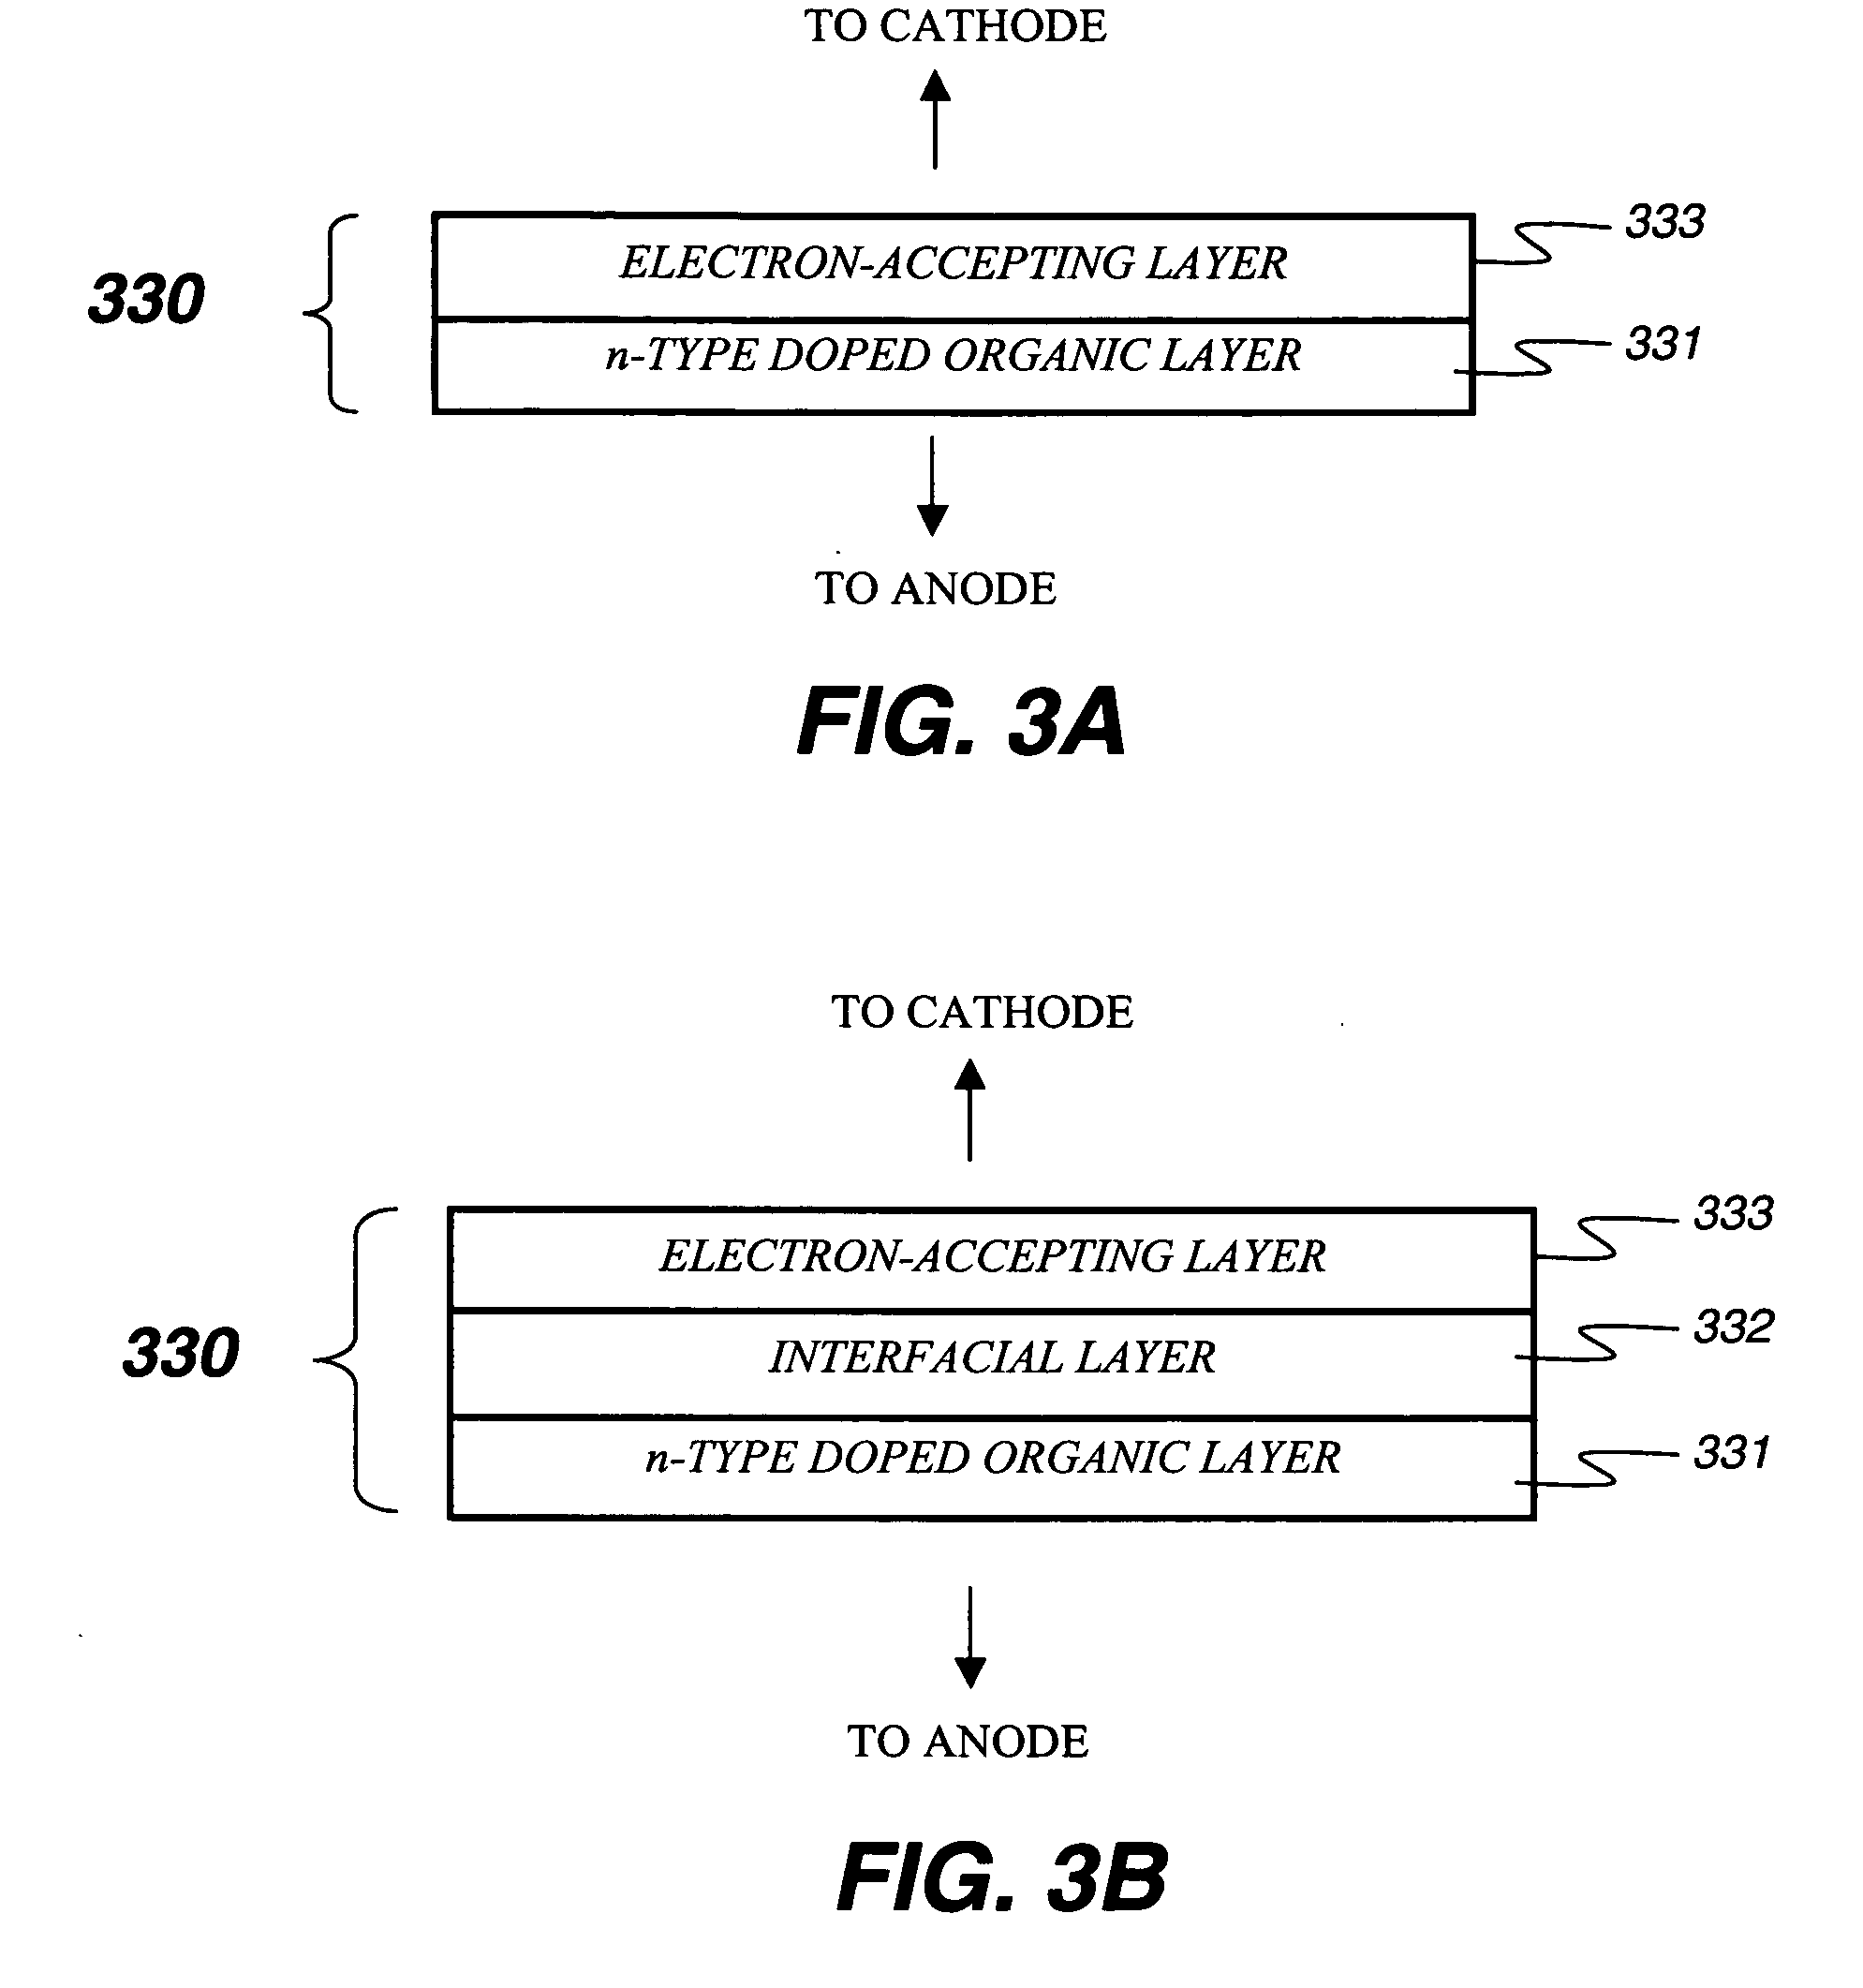 OLED device with improved performance